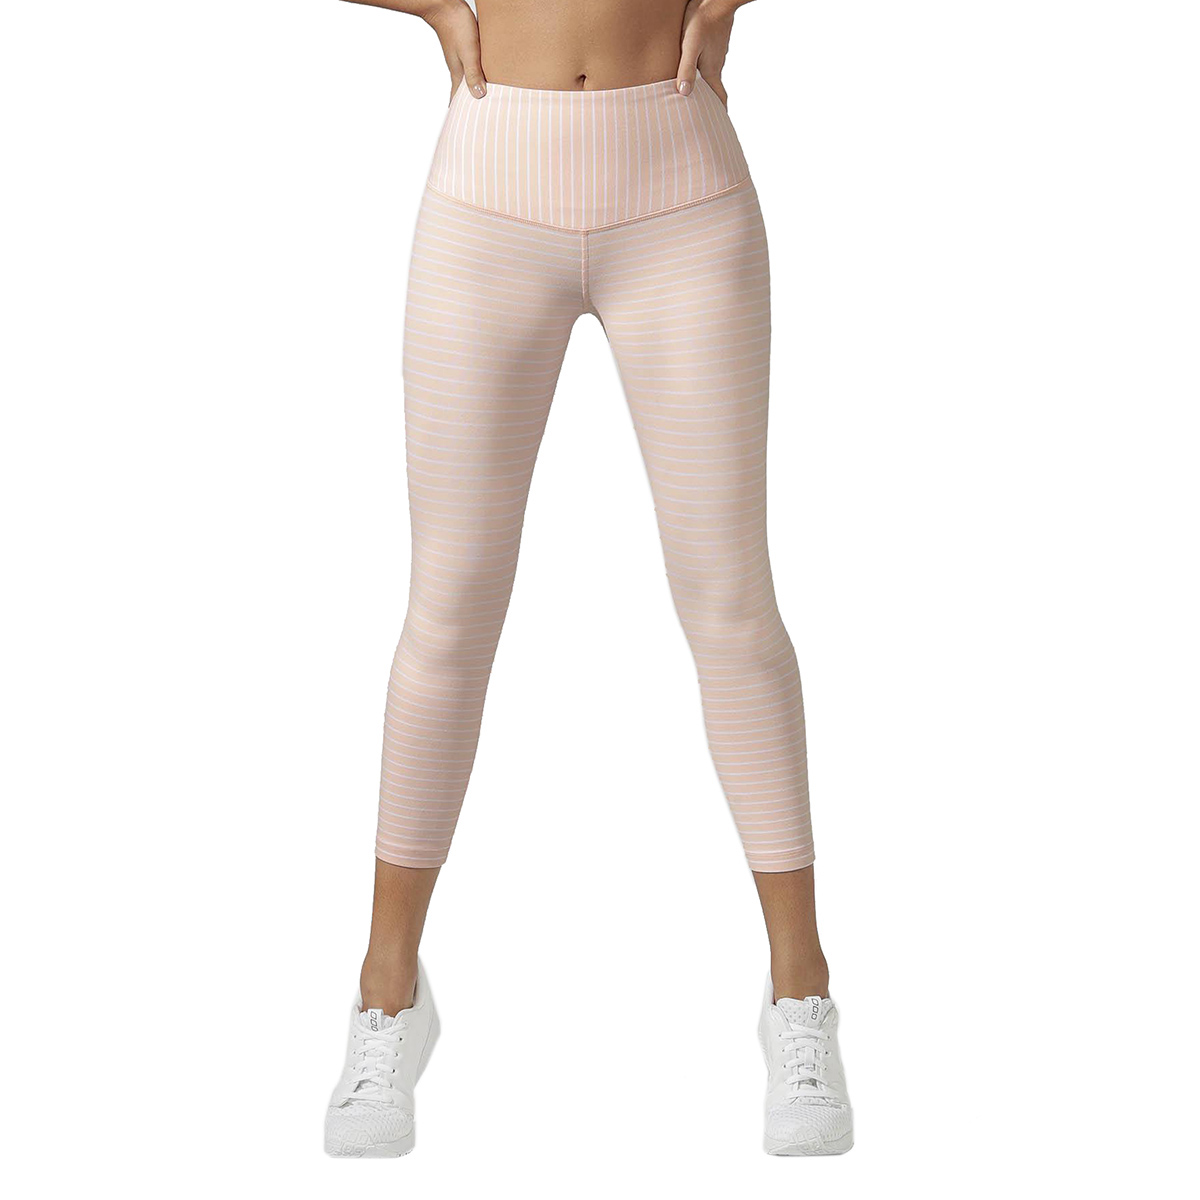 Lorna Jane Venice Stripe Core 7/8 Tight, , large image number null